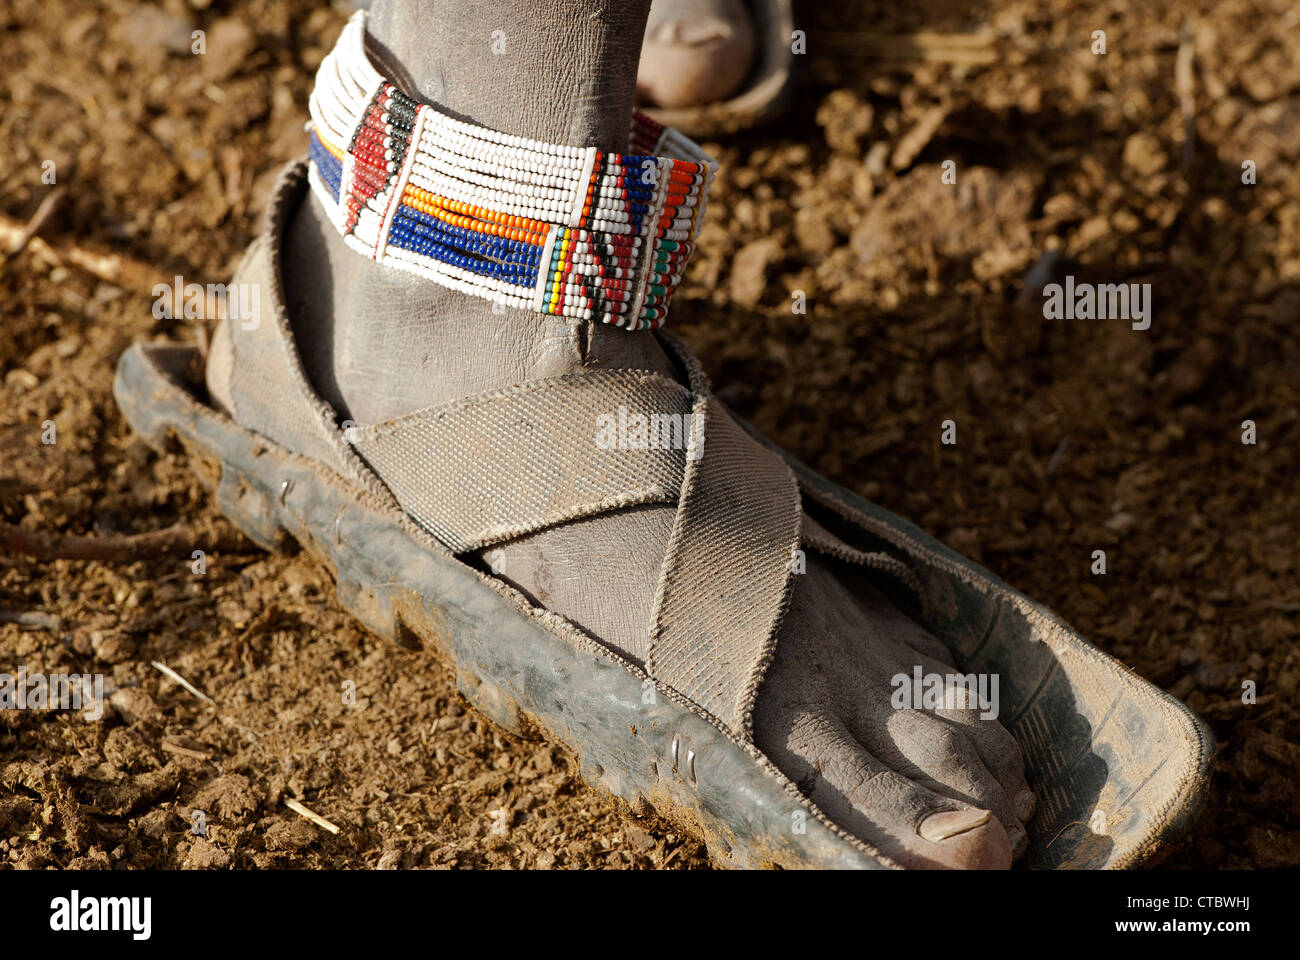 The dry, dusty feet of a Maasai Tribesman with beaded adornment Stock Photo